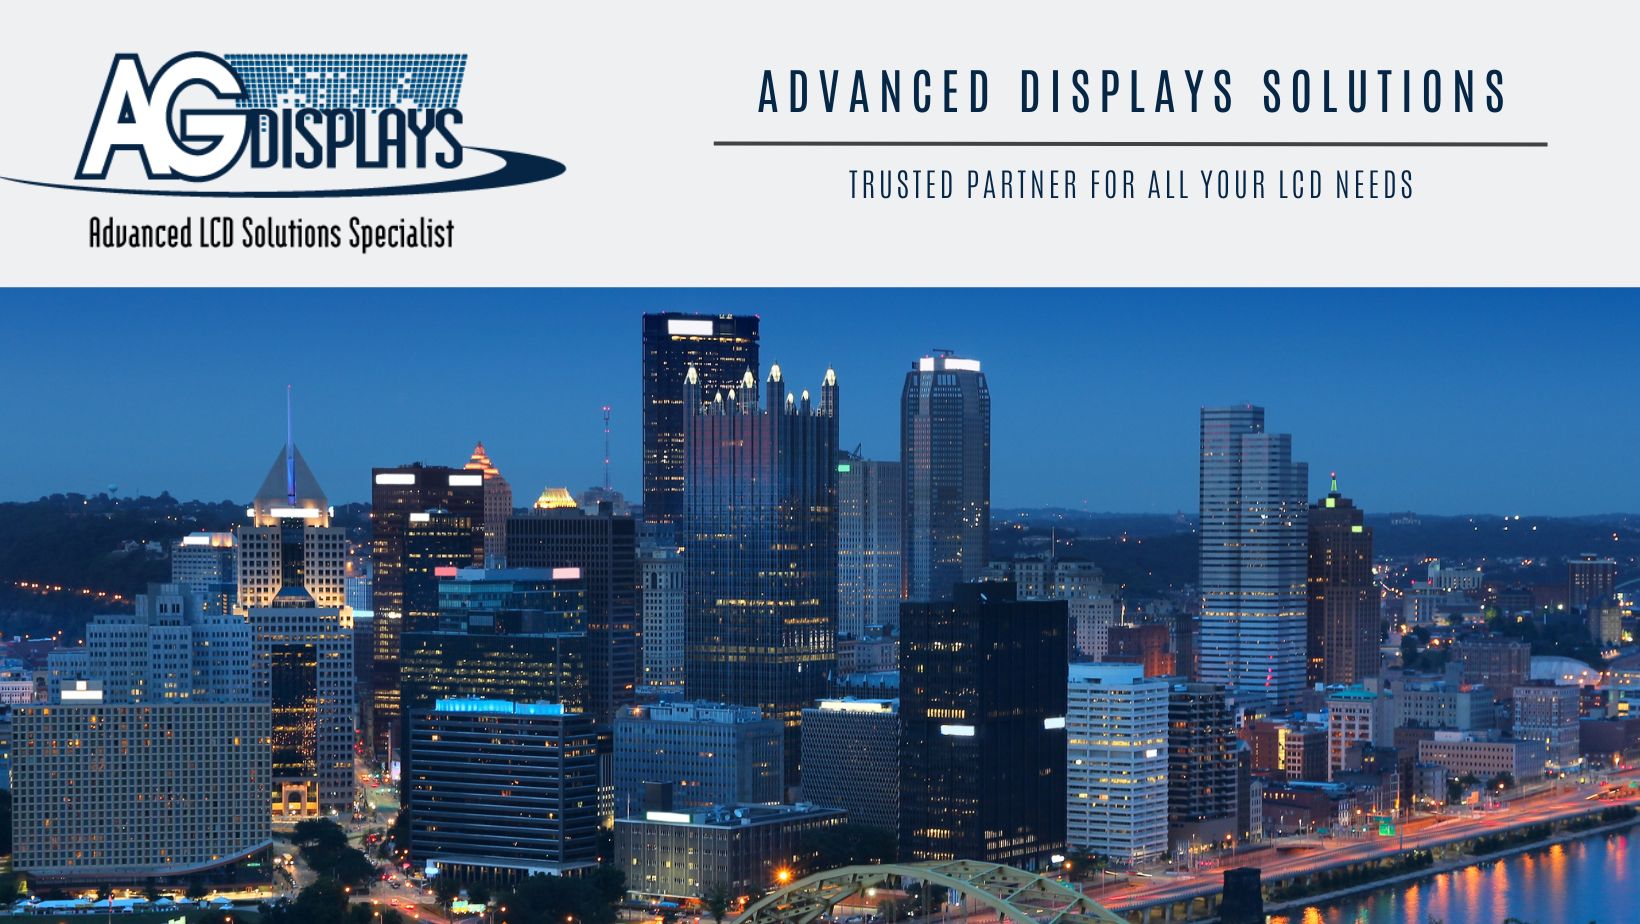 Load video: This video shows AGDisplays technicians performing high quality LCD enhancements.